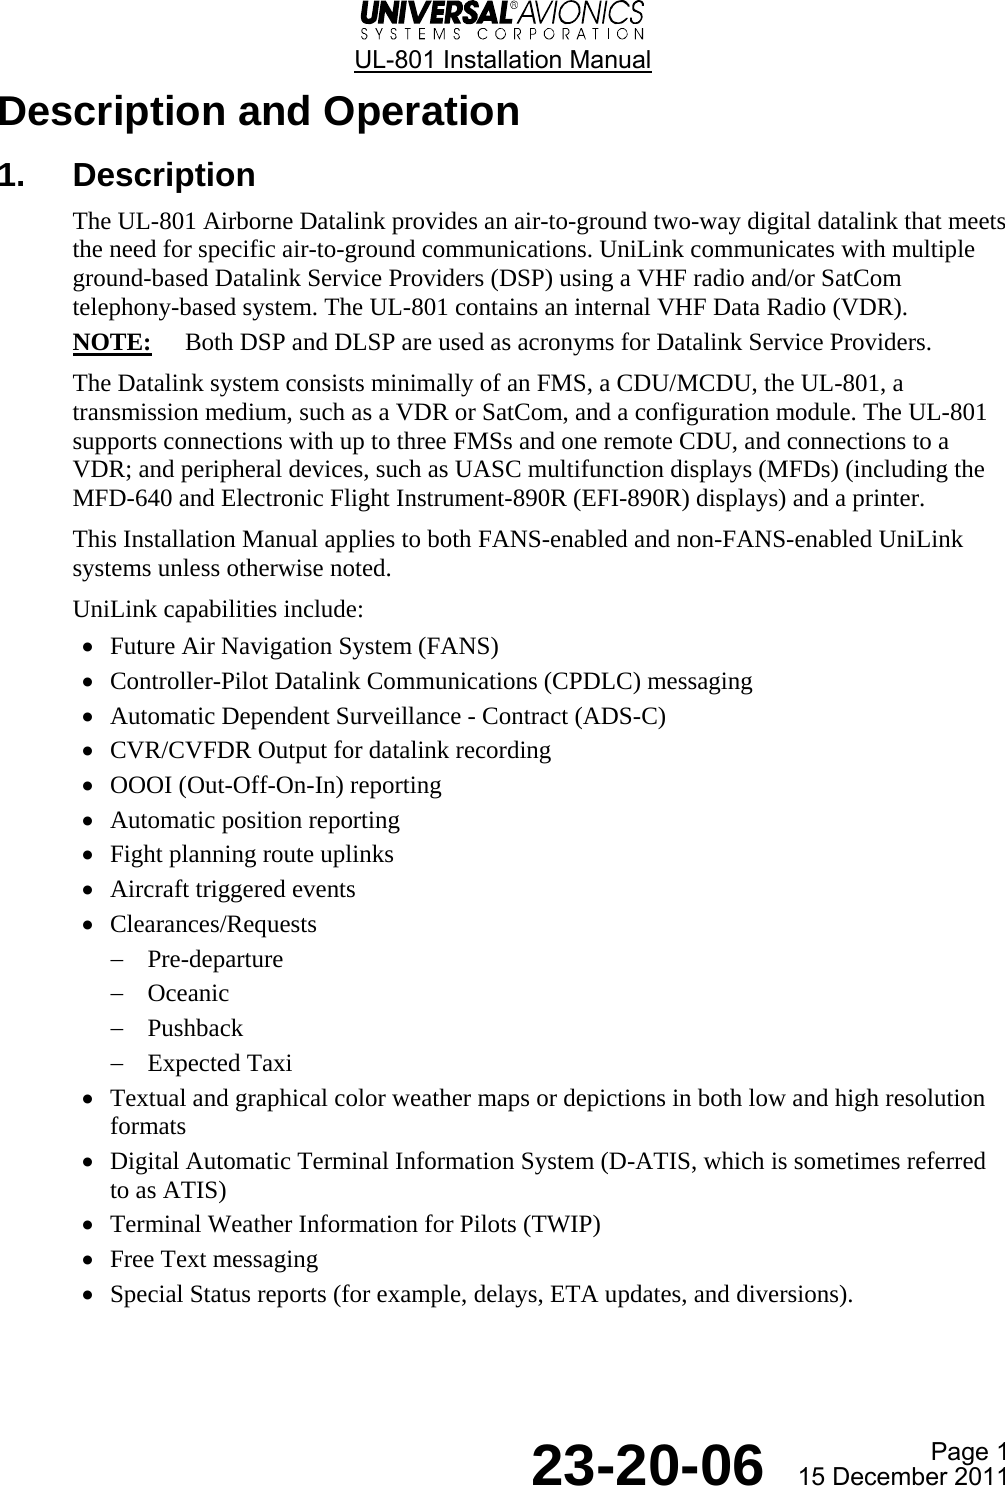  UL-801 Installation Manual  Page 1  23-20-06  15 December 2011 Description and Operation 1. Description The UL-801 Airborne Datalink provides an air-to-ground two-way digital datalink that meets the need for specific air-to-ground communications. UniLink communicates with multiple ground-based Datalink Service Providers (DSP) using a VHF radio and/or SatCom telephony-based system. The UL-801 contains an internal VHF Data Radio (VDR). NOTE:  Both DSP and DLSP are used as acronyms for Datalink Service Providers. The Datalink system consists minimally of an FMS, a CDU/MCDU, the UL-801, a transmission medium, such as a VDR or SatCom, and a configuration module. The UL-801 supports connections with up to three FMSs and one remote CDU, and connections to a VDR; and peripheral devices, such as UASC multifunction displays (MFDs) (including the MFD-640 and Electronic Flight Instrument-890R (EFI-890R) displays) and a printer. This Installation Manual applies to both FANS-enabled and non-FANS-enabled UniLink systems unless otherwise noted. UniLink capabilities include: • Future Air Navigation System (FANS) • Controller-Pilot Datalink Communications (CPDLC) messaging • Automatic Dependent Surveillance - Contract (ADS-C) • CVR/CVFDR Output for datalink recording • OOOI (Out-Off-On-In) reporting • Automatic position reporting • Fight planning route uplinks • Aircraft triggered events • Clearances/Requests − Pre-departure − Oceanic − Pushback − Expected Taxi • Textual and graphical color weather maps or depictions in both low and high resolution formats • Digital Automatic Terminal Information System (D-ATIS, which is sometimes referred to as ATIS) • Terminal Weather Information for Pilots (TWIP) • Free Text messaging • Special Status reports (for example, delays, ETA updates, and diversions).   